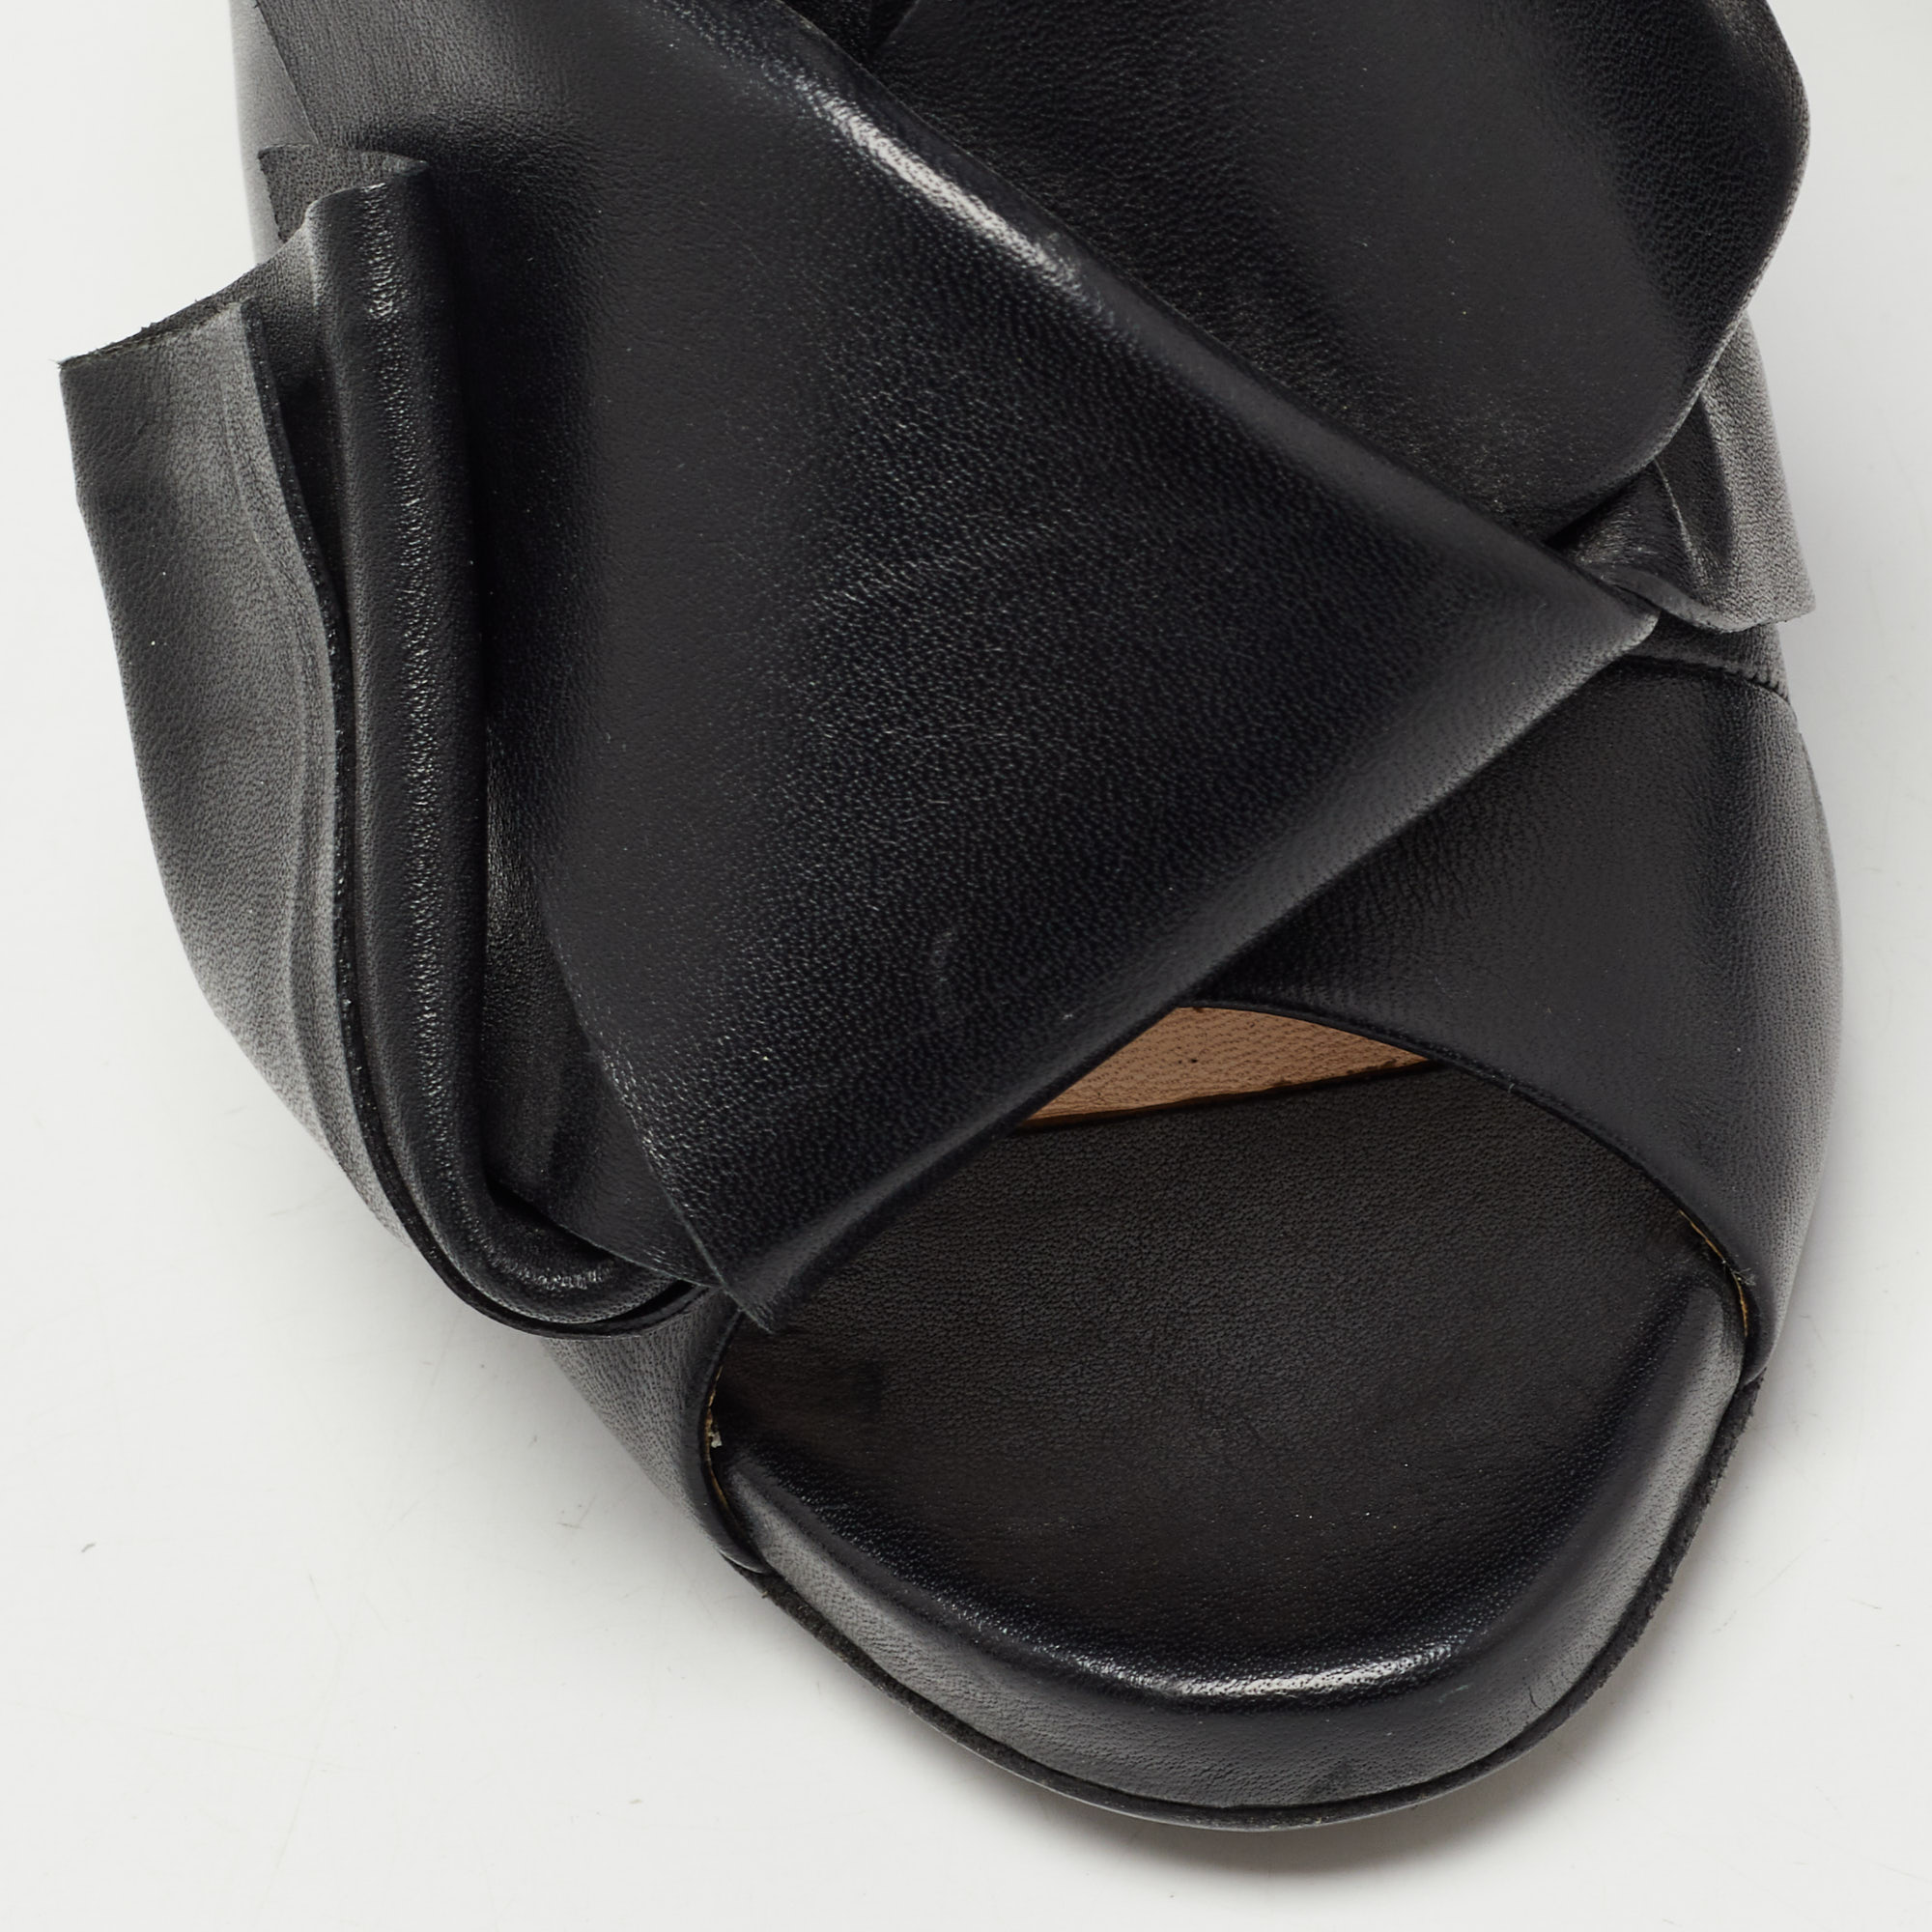 N21 Black Leather Raso Knot Mules Size 37